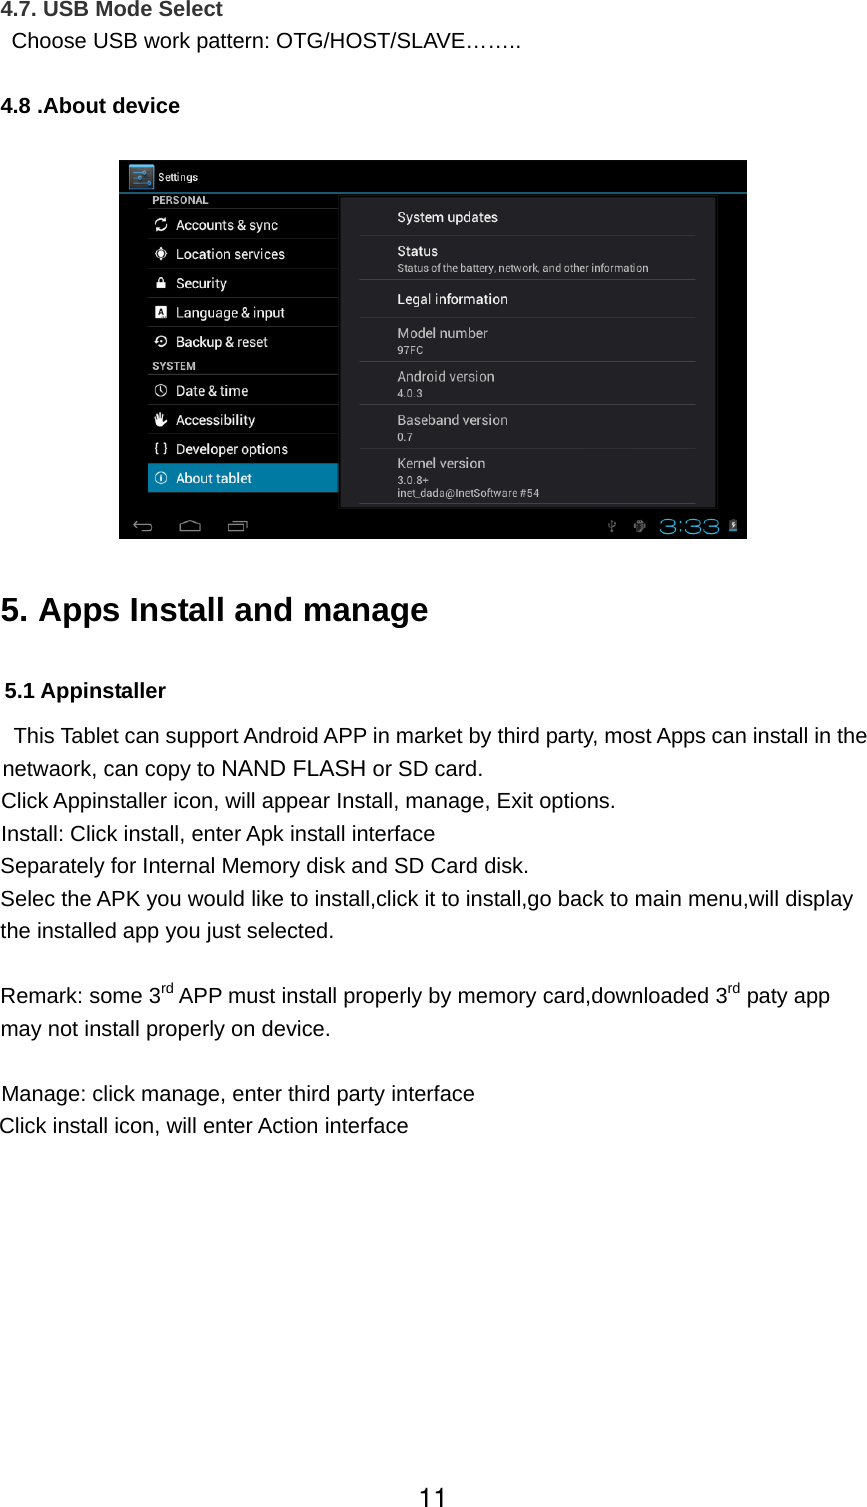  4.7. USB Mode Select   Choose USB work pattern: OTG/HOST/SLAVE……..  4.8 .About device    5. Apps Install and manage  5.1 Appinstaller   This Tablet can support Android APP in market by third party, most Apps can install in the netwaork, can copy to NAND FLASH or SD card.   Click Appinstaller icon, will appear Install, manage, Exit options.   Install: Click install, enter Apk install interface Separately for Internal Memory disk and SD Card disk. Selec the APK you would like to install,click it to install,go back to main menu,will display the installed app you just selected.  Remark: some 3rd APP must install properly by memory card,downloaded 3rd paty app may not install properly on device.  Manage: click manage, enter third party interface Click install icon, will enter Action interface 11